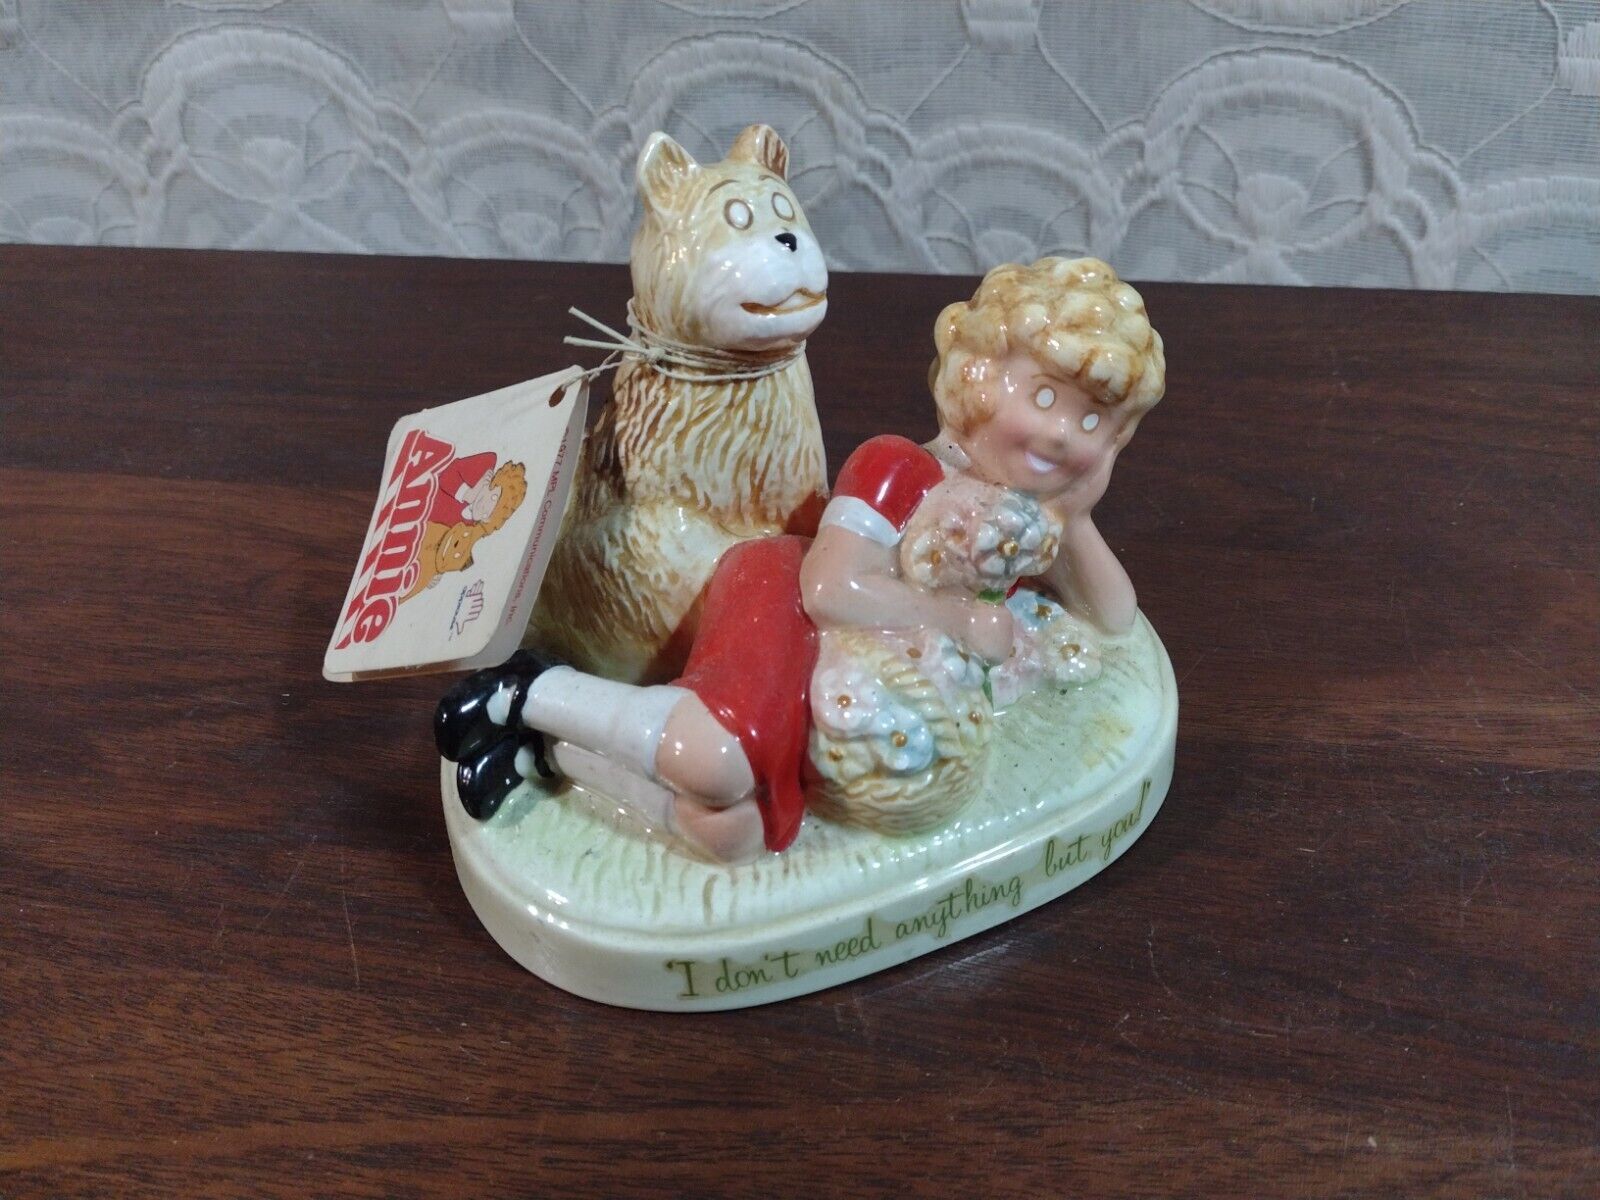 1982 Little Orphan Annie and Sandy Figurine by Applause ORIGINAL PAPER TAG LABEL - $13.99